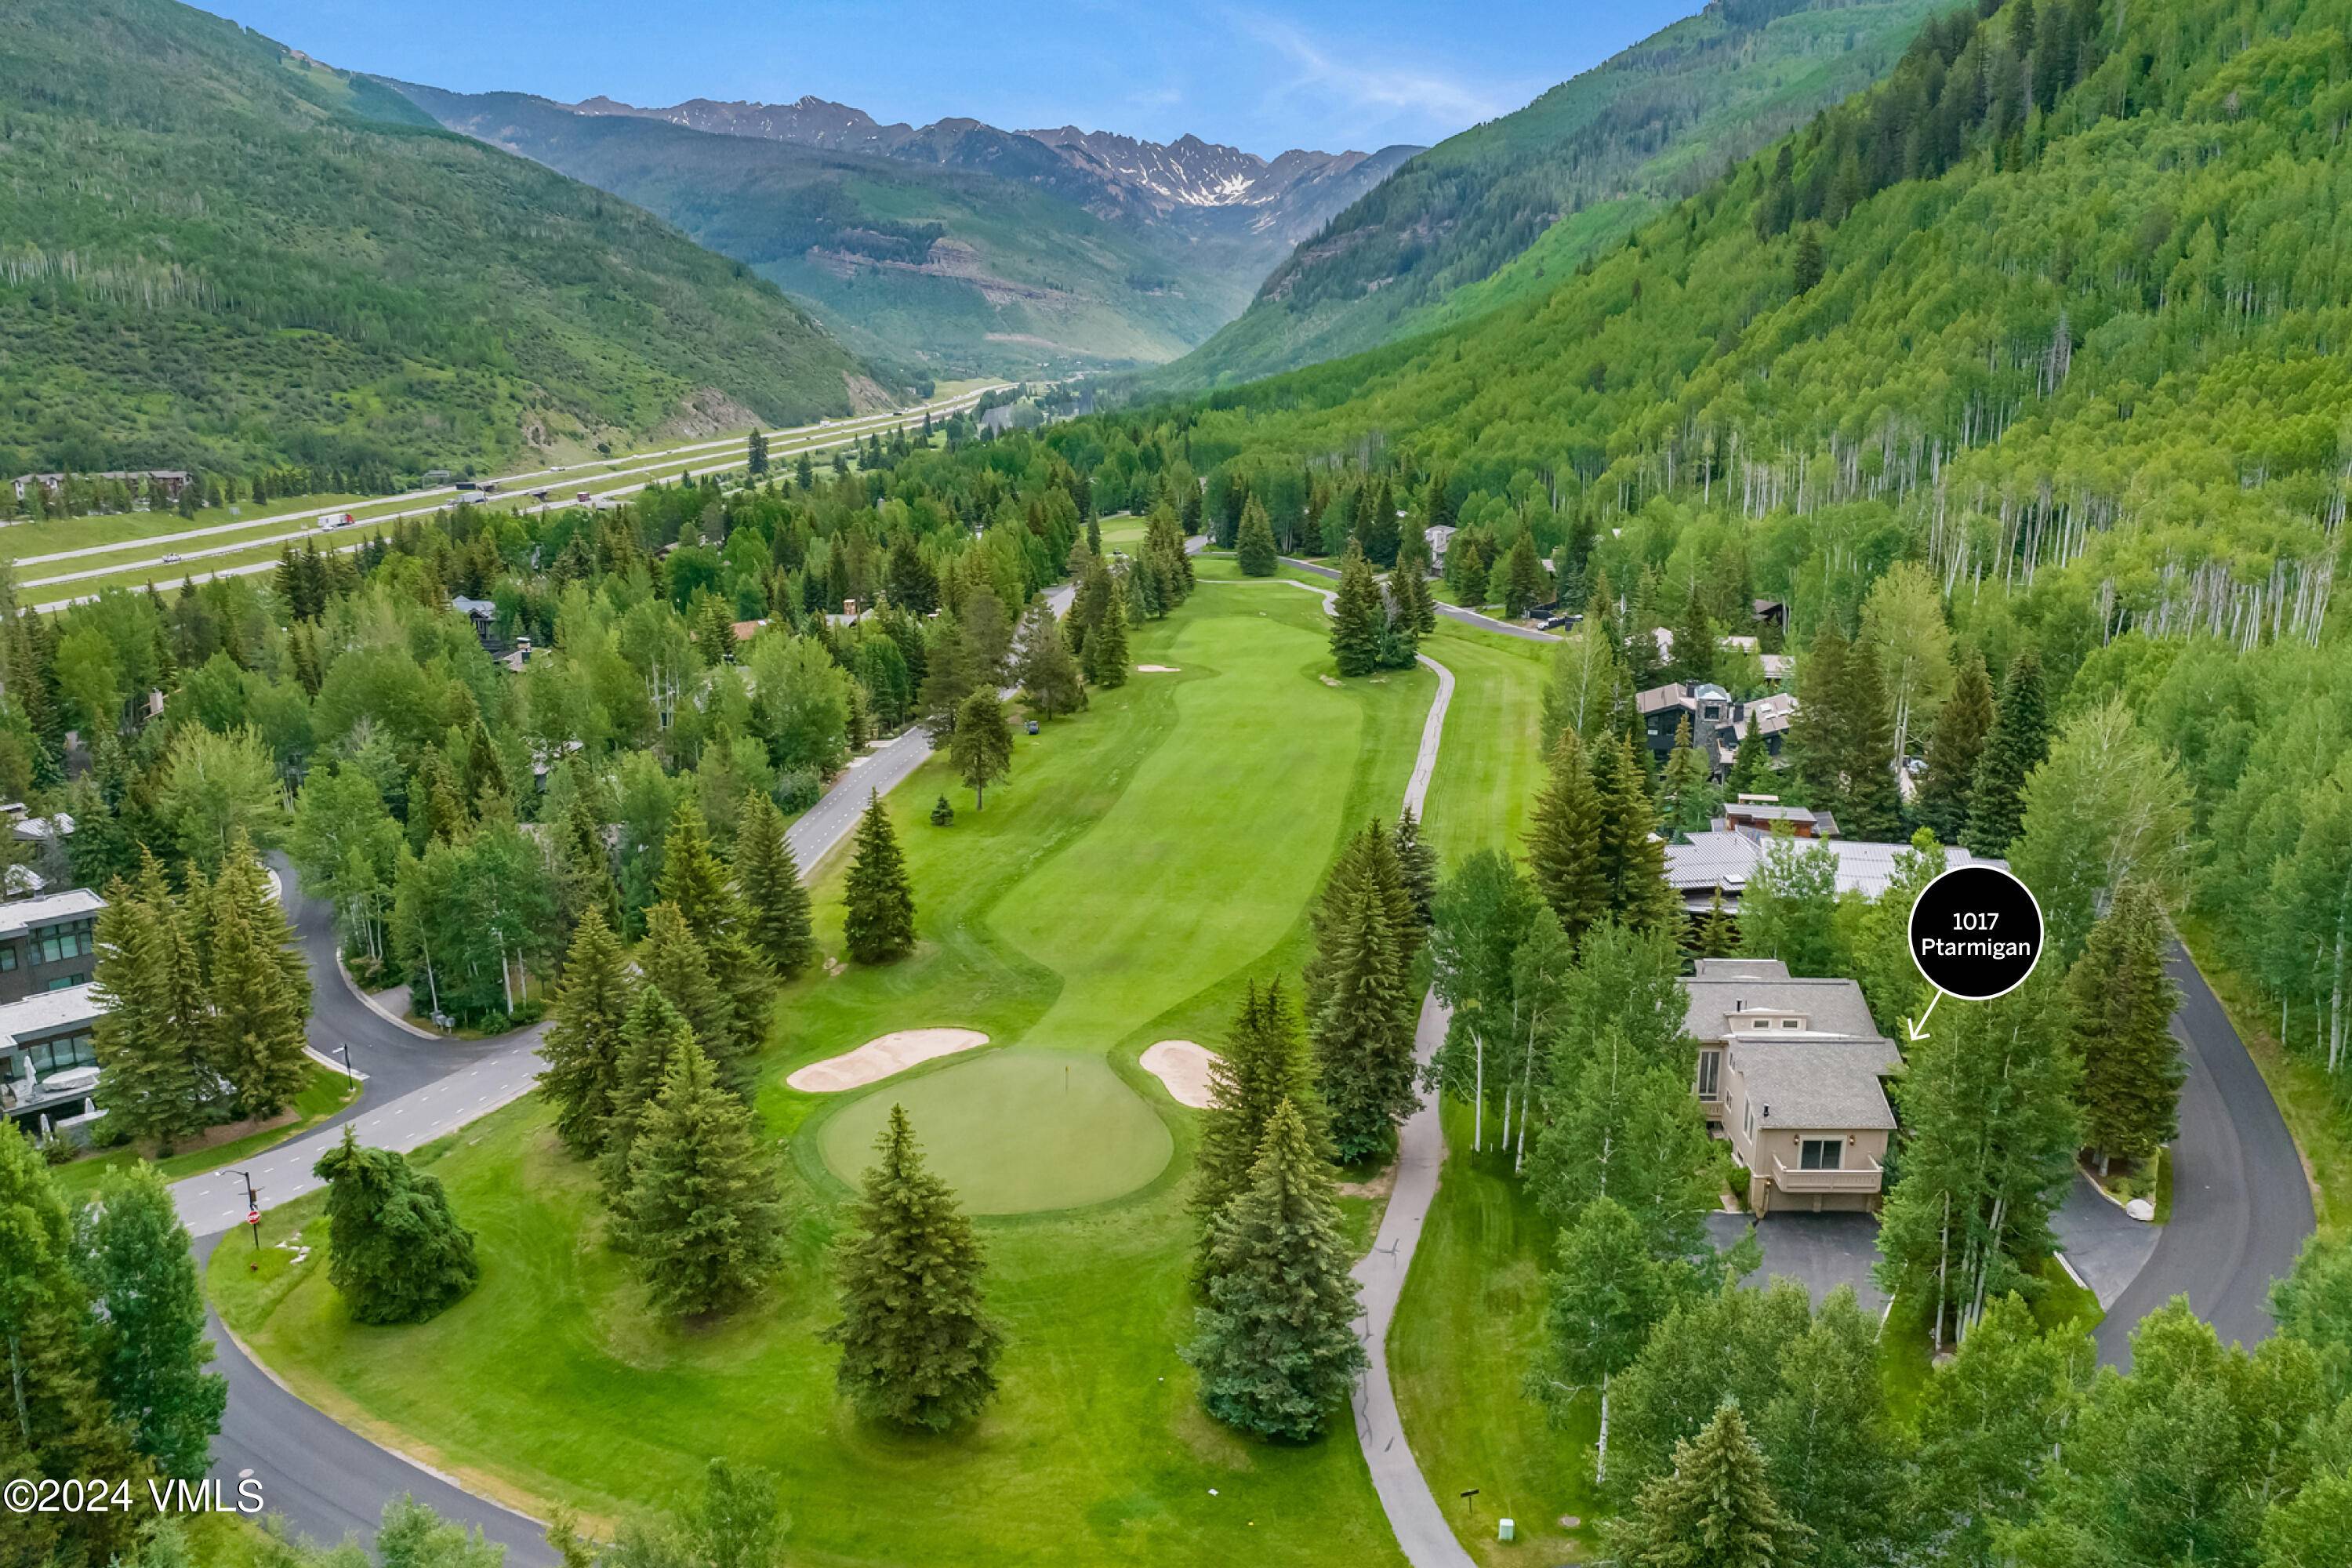 Nestled alongside the picturesque 4th green of the renowned Vail Golf Course, and just a half mile from the Golden Peak base area of Vail Mountain, this home offers unparalleled ...